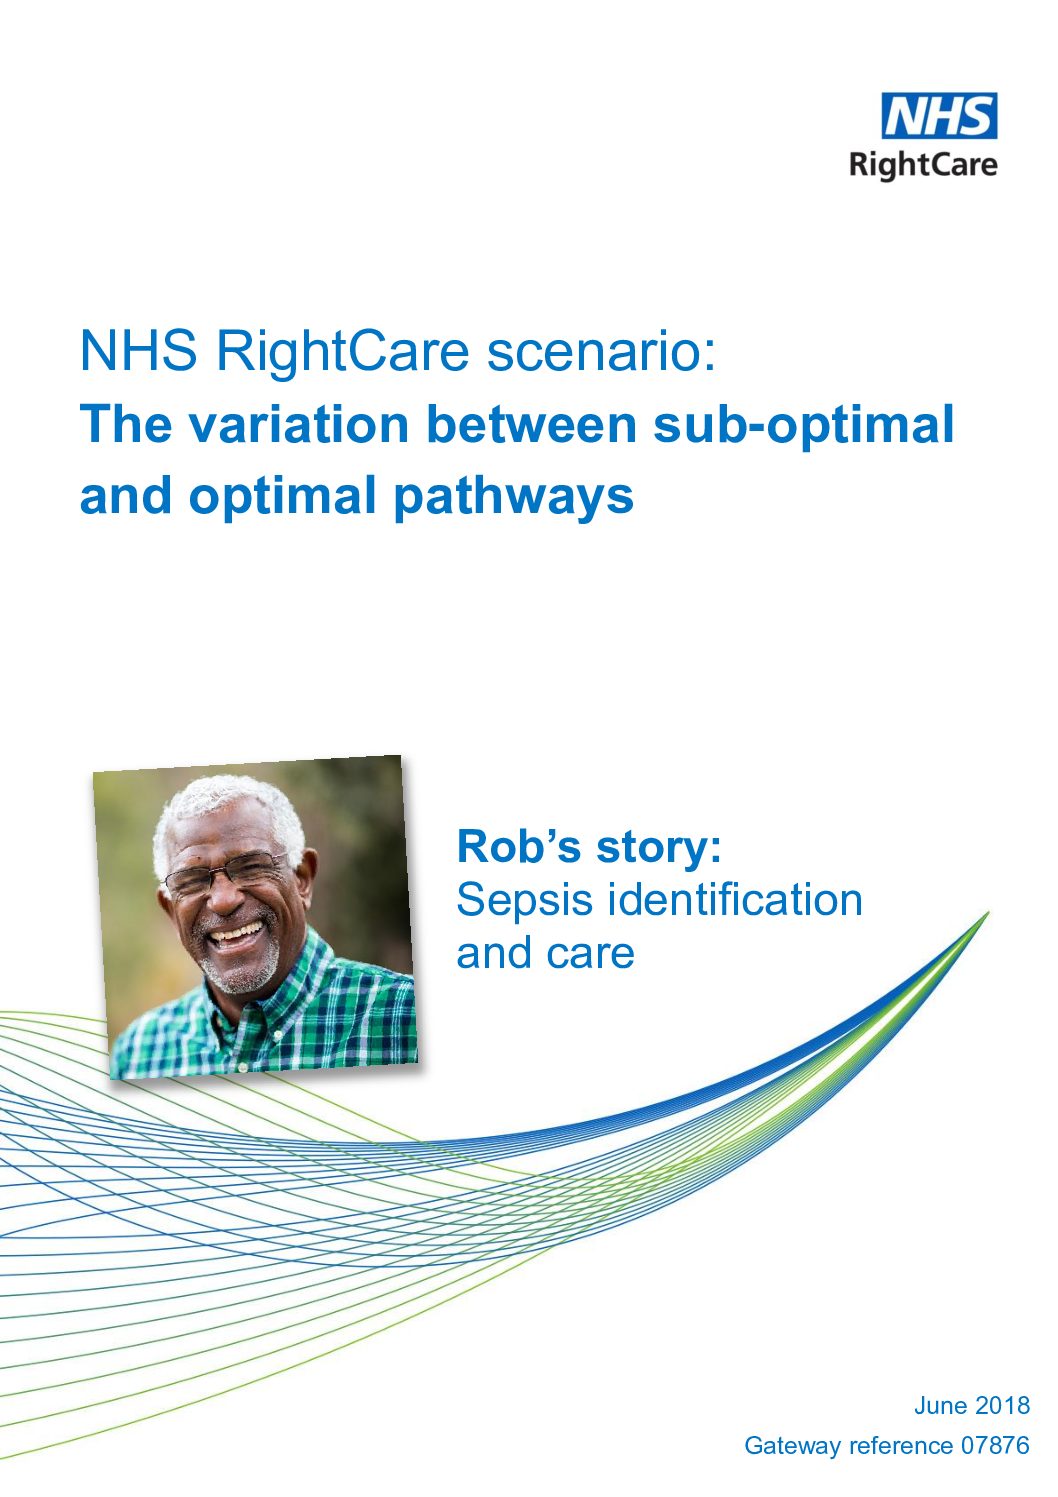 NHS RightCare sepsis-scenario - the variation between optimal and sub-optimal care